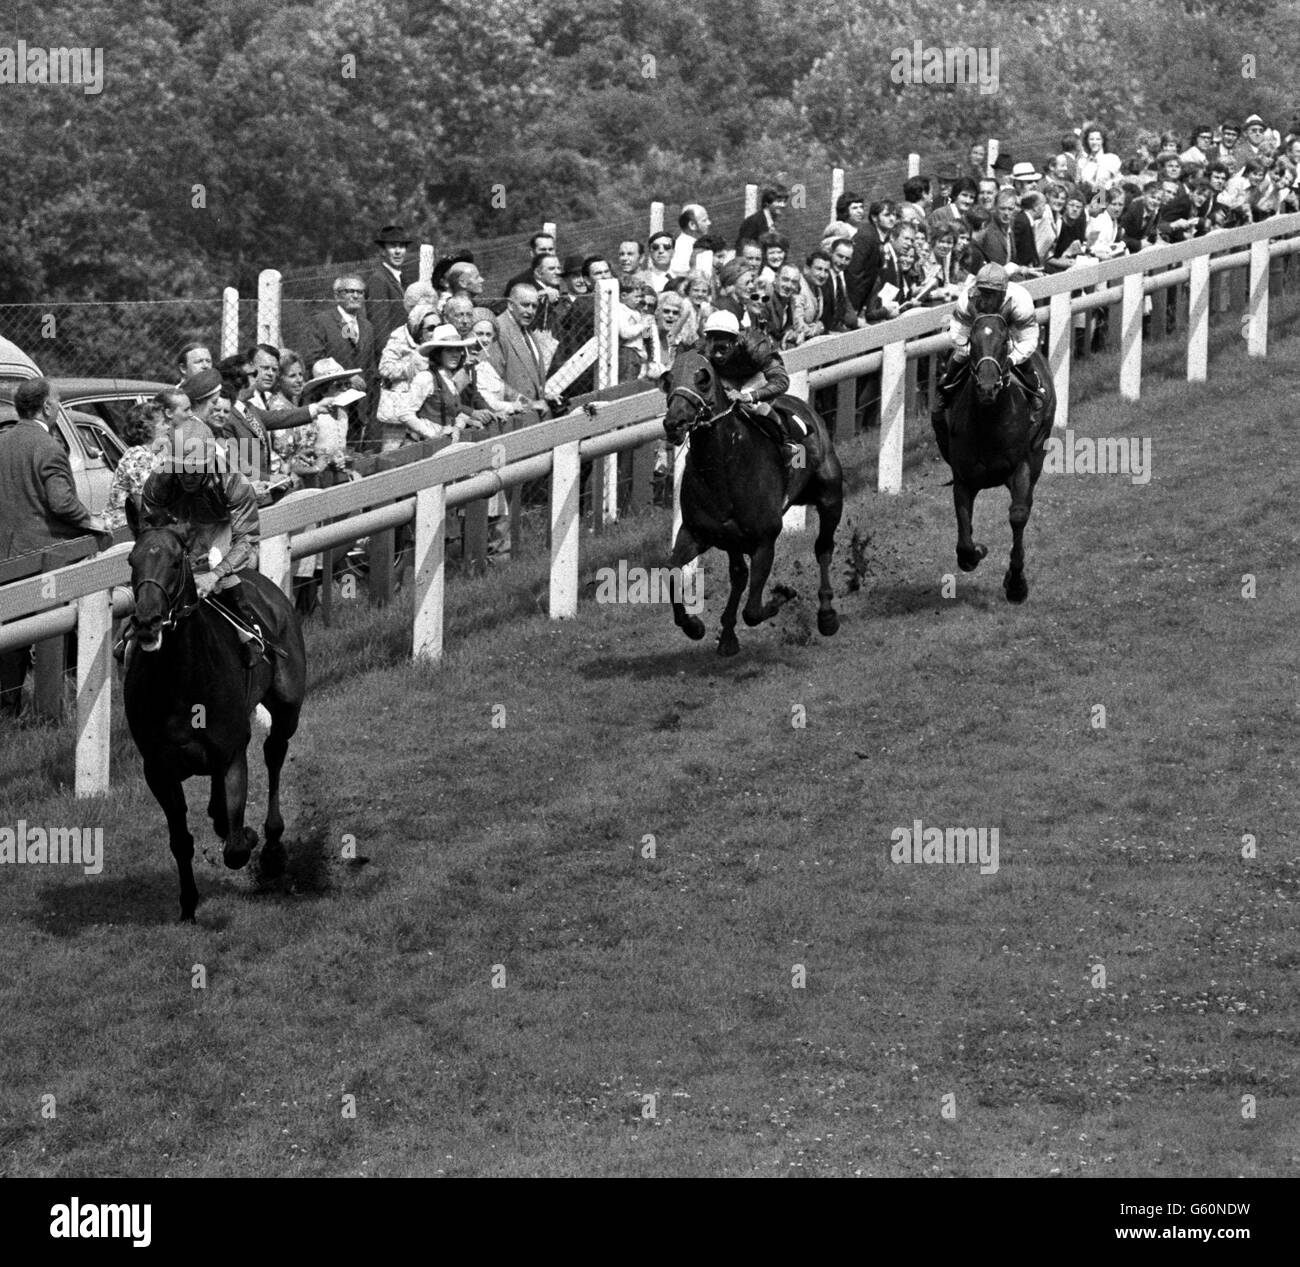 Brigadier Gerard (left) ridden by Joe Mercer easily winning the Sussex Stakes here today from Faraway Son (USA) (second) ridden by Y Saint Martin. Third was Joshua, ridden by G Lewis. Stock Photo